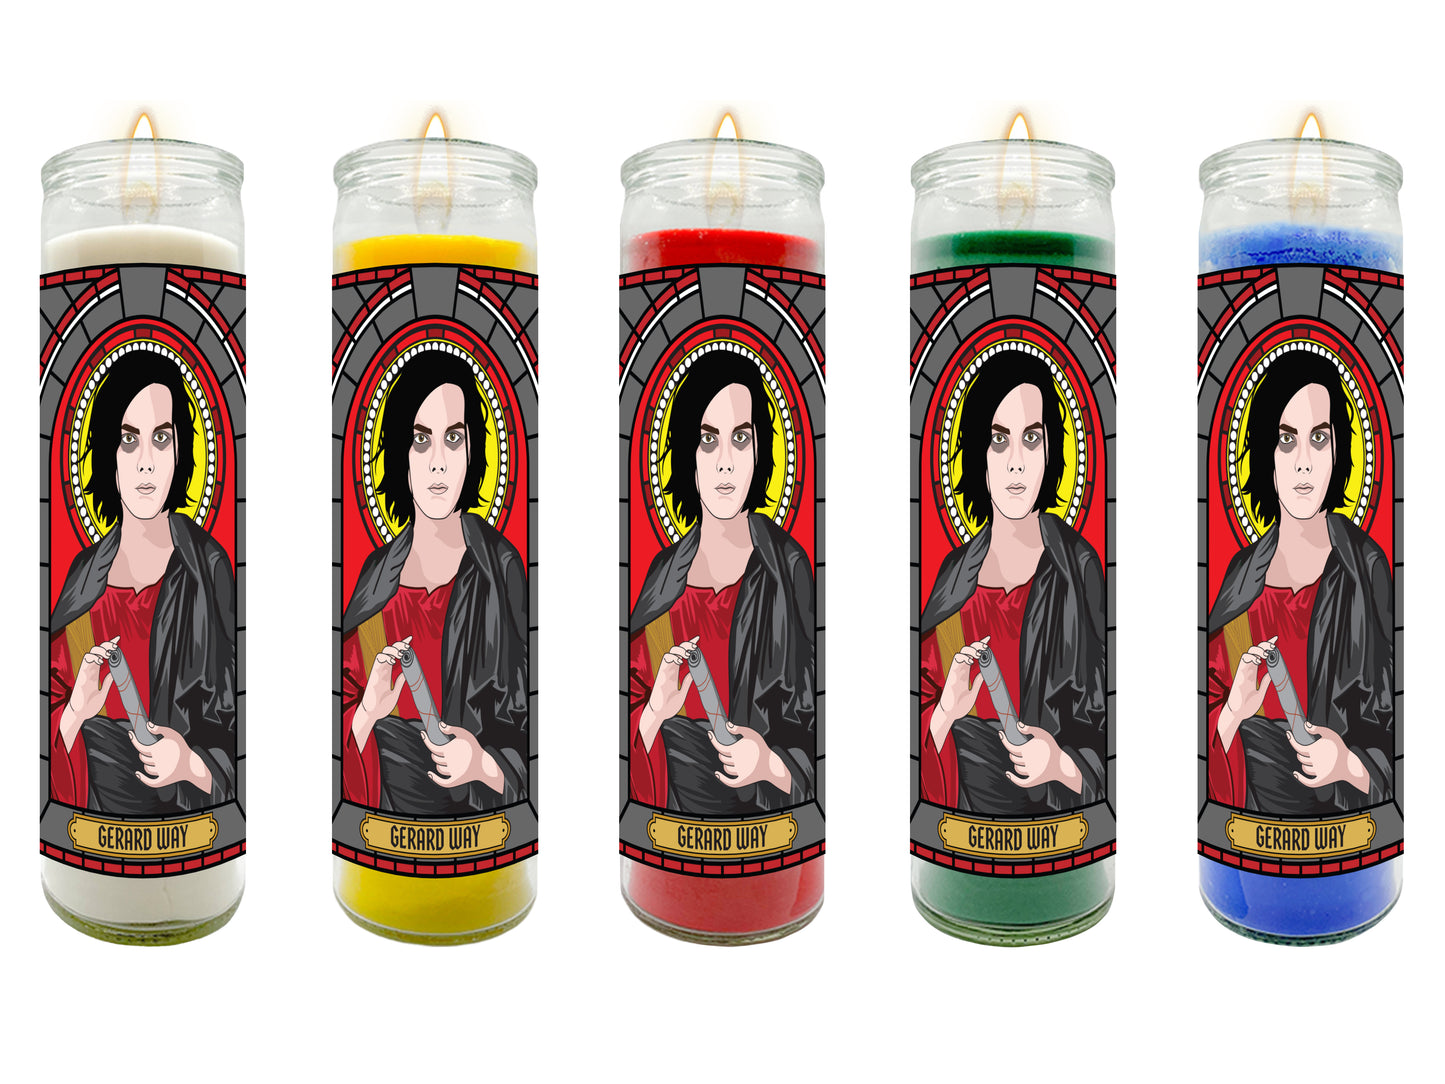 Gerard Way My Chemical Romance Illustrated Prayer Candle